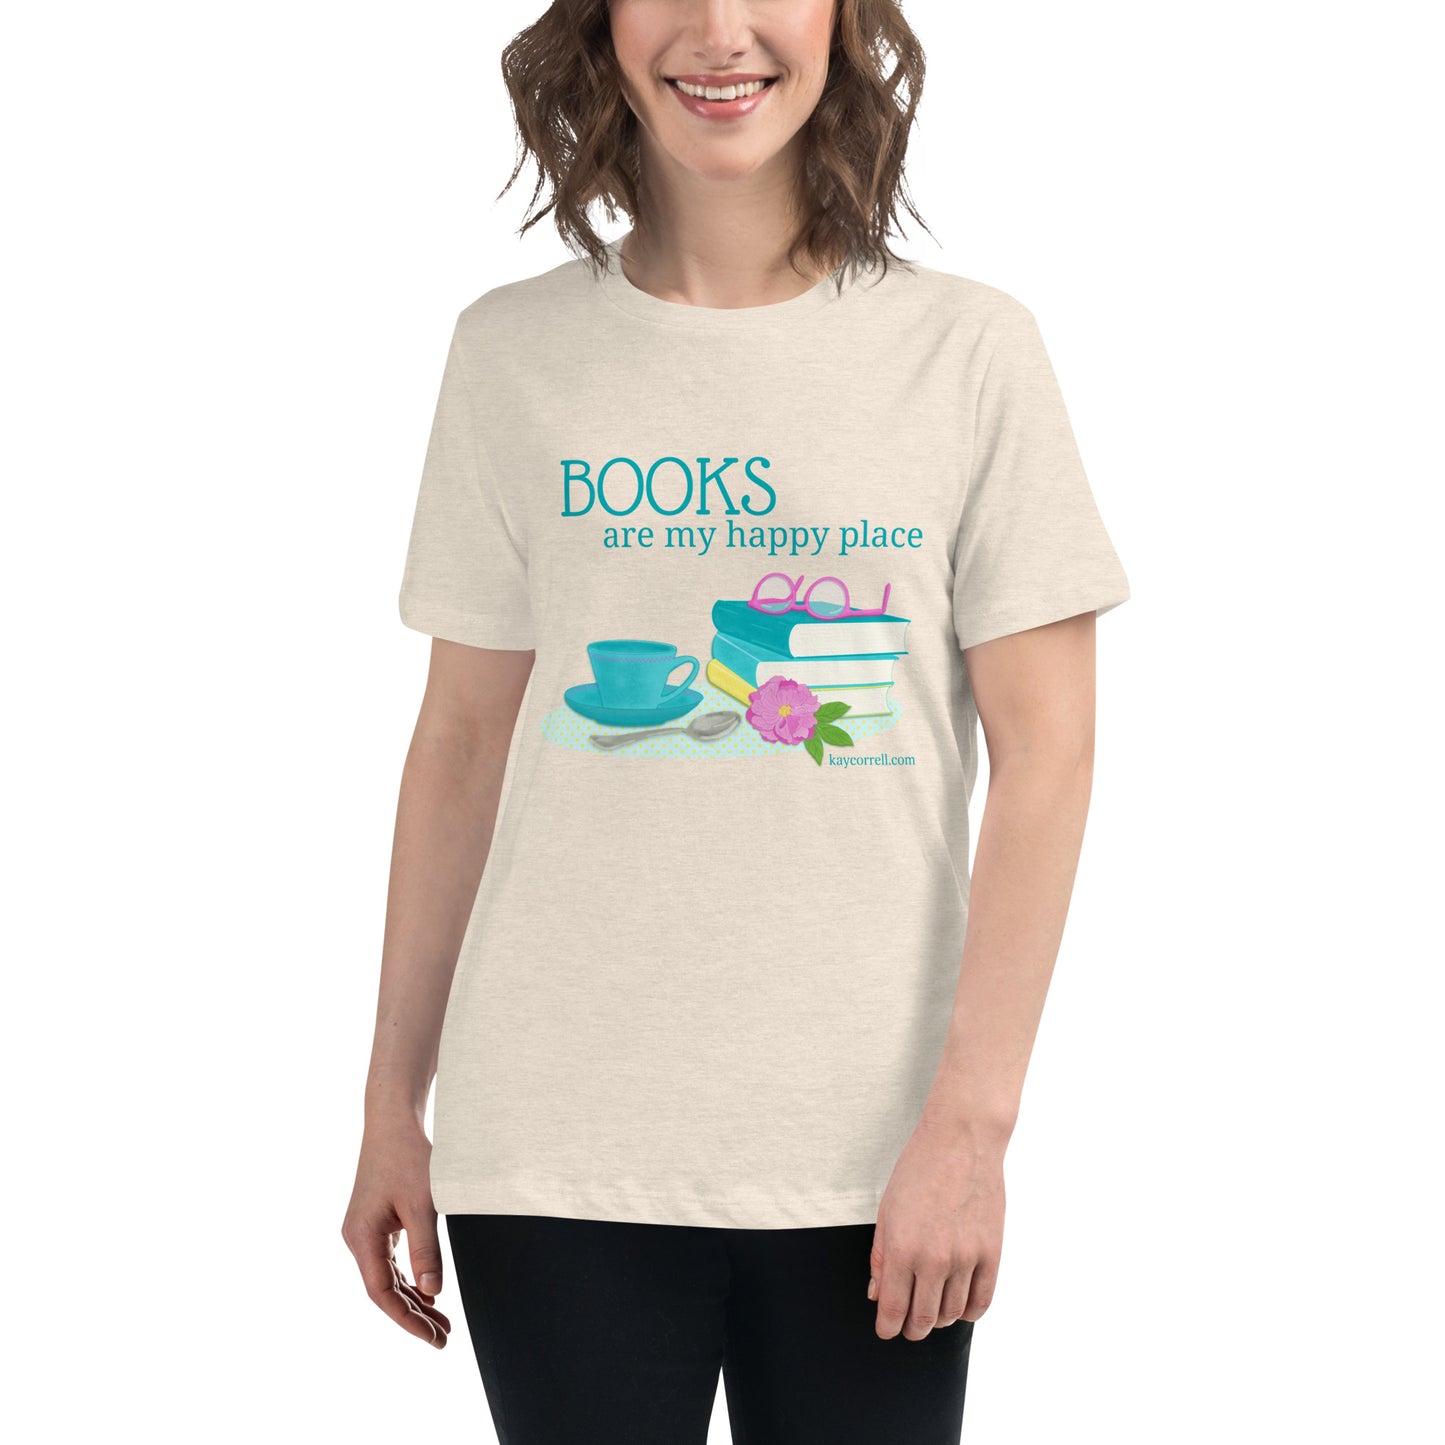 Women's Relaxed T-Shirt - Books are my Happy Place.